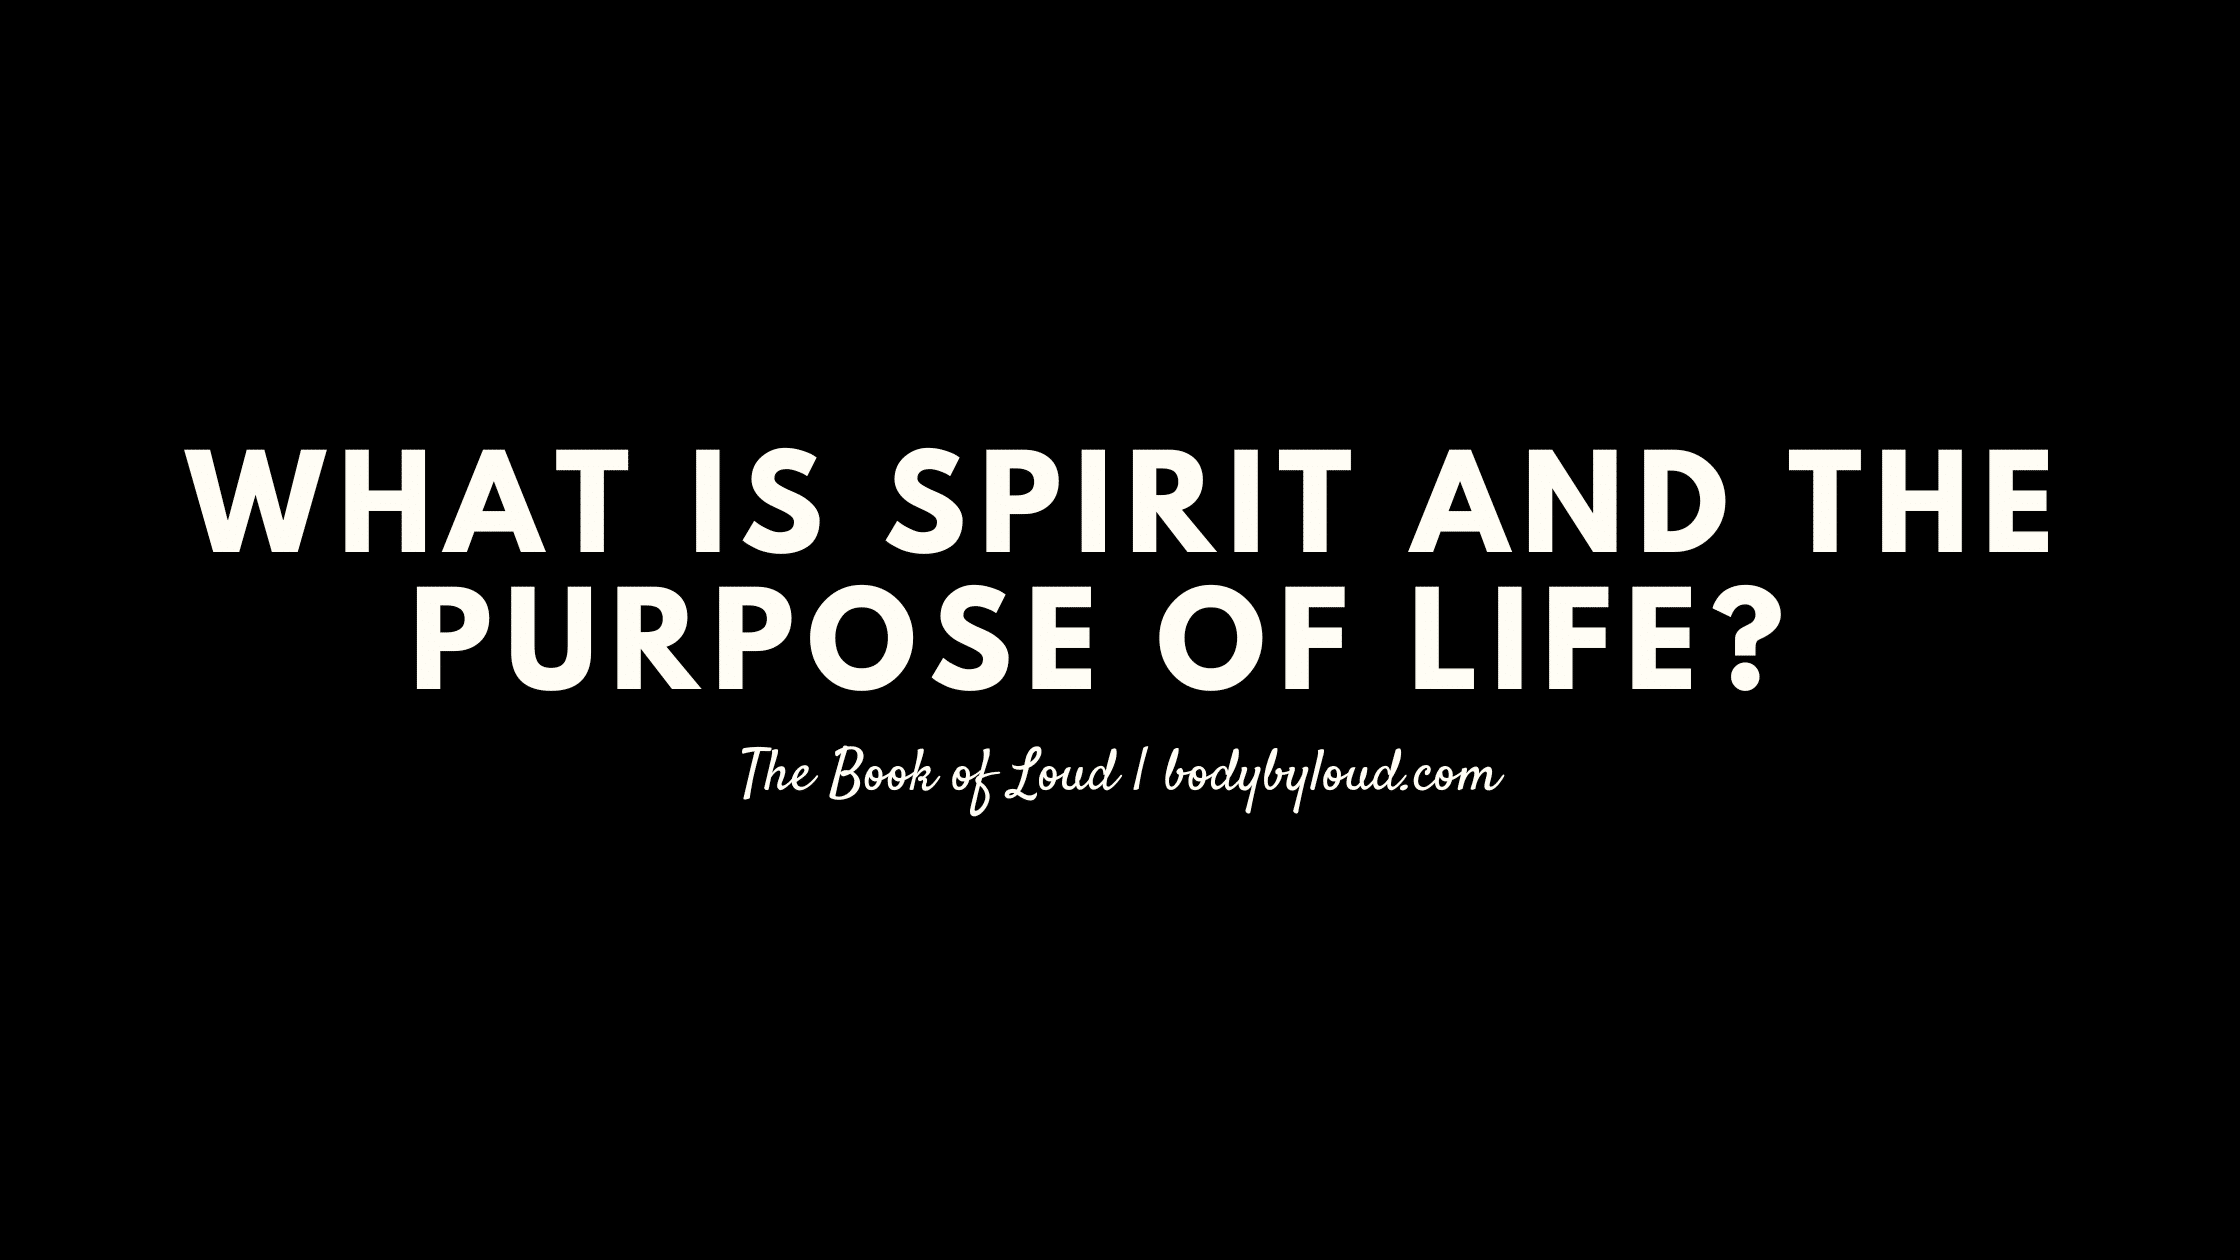 What is Spirit and the Purpose of Life